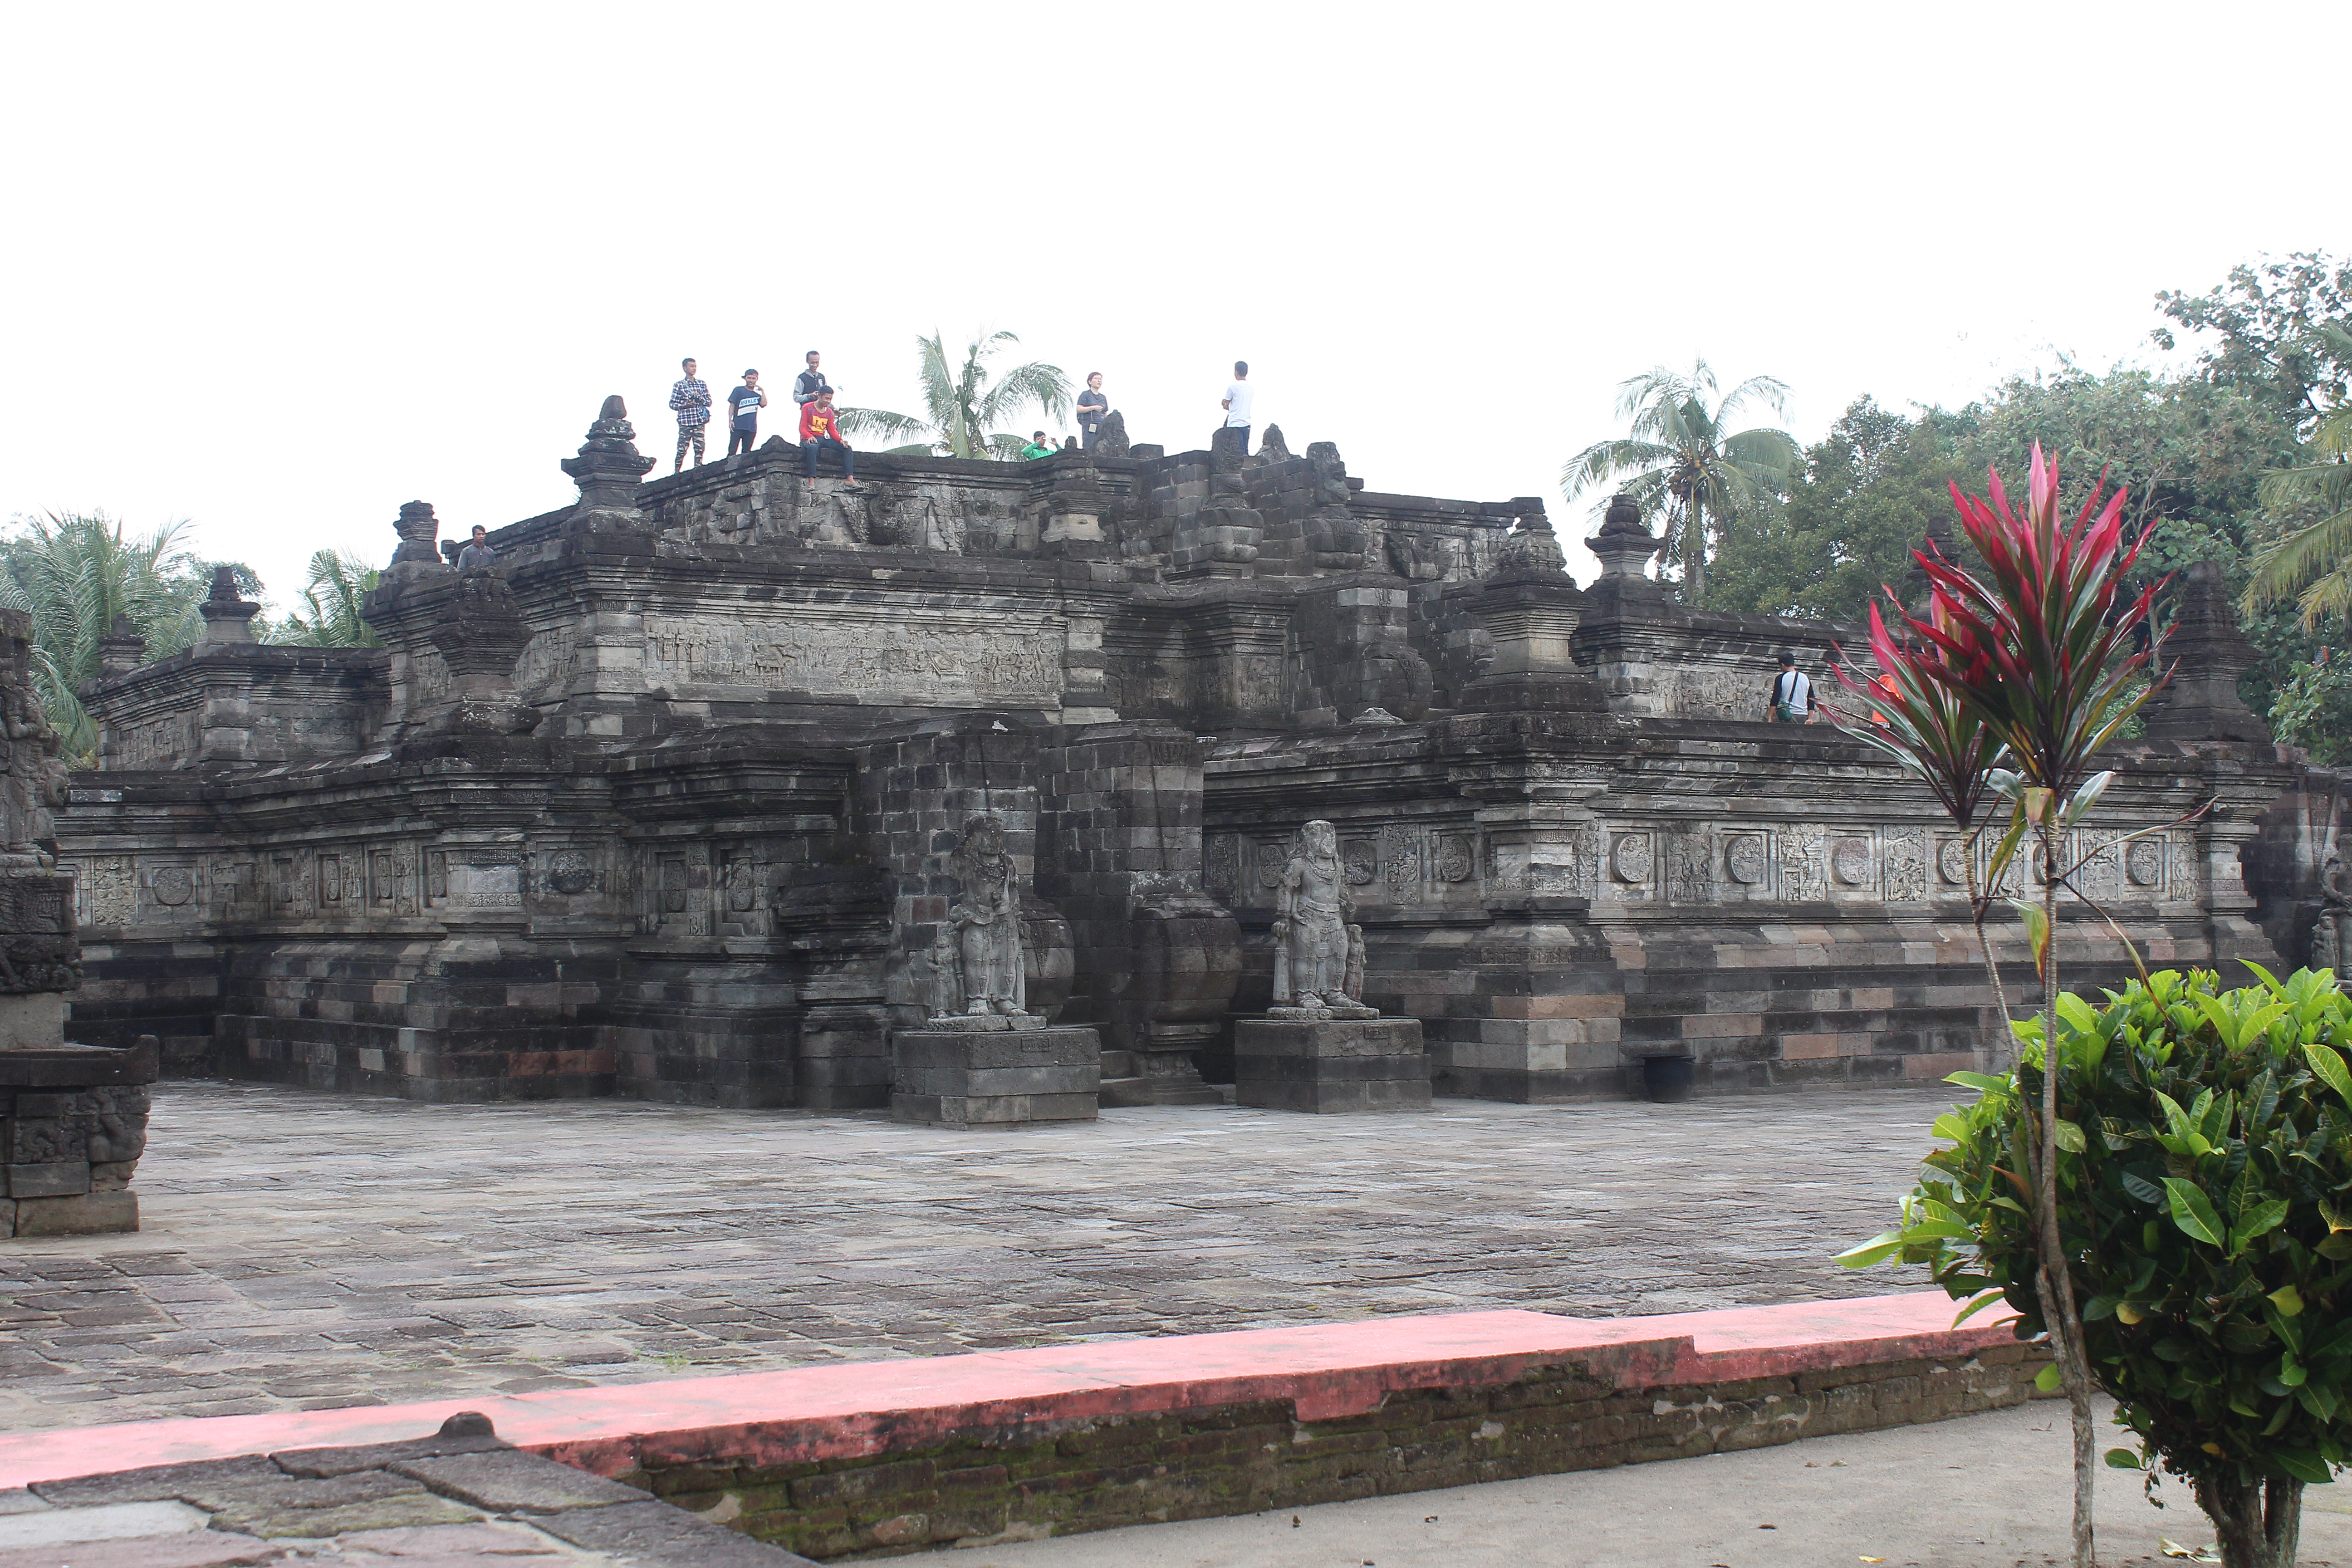 Large stone temple complex with relief carvings in a monumentified area